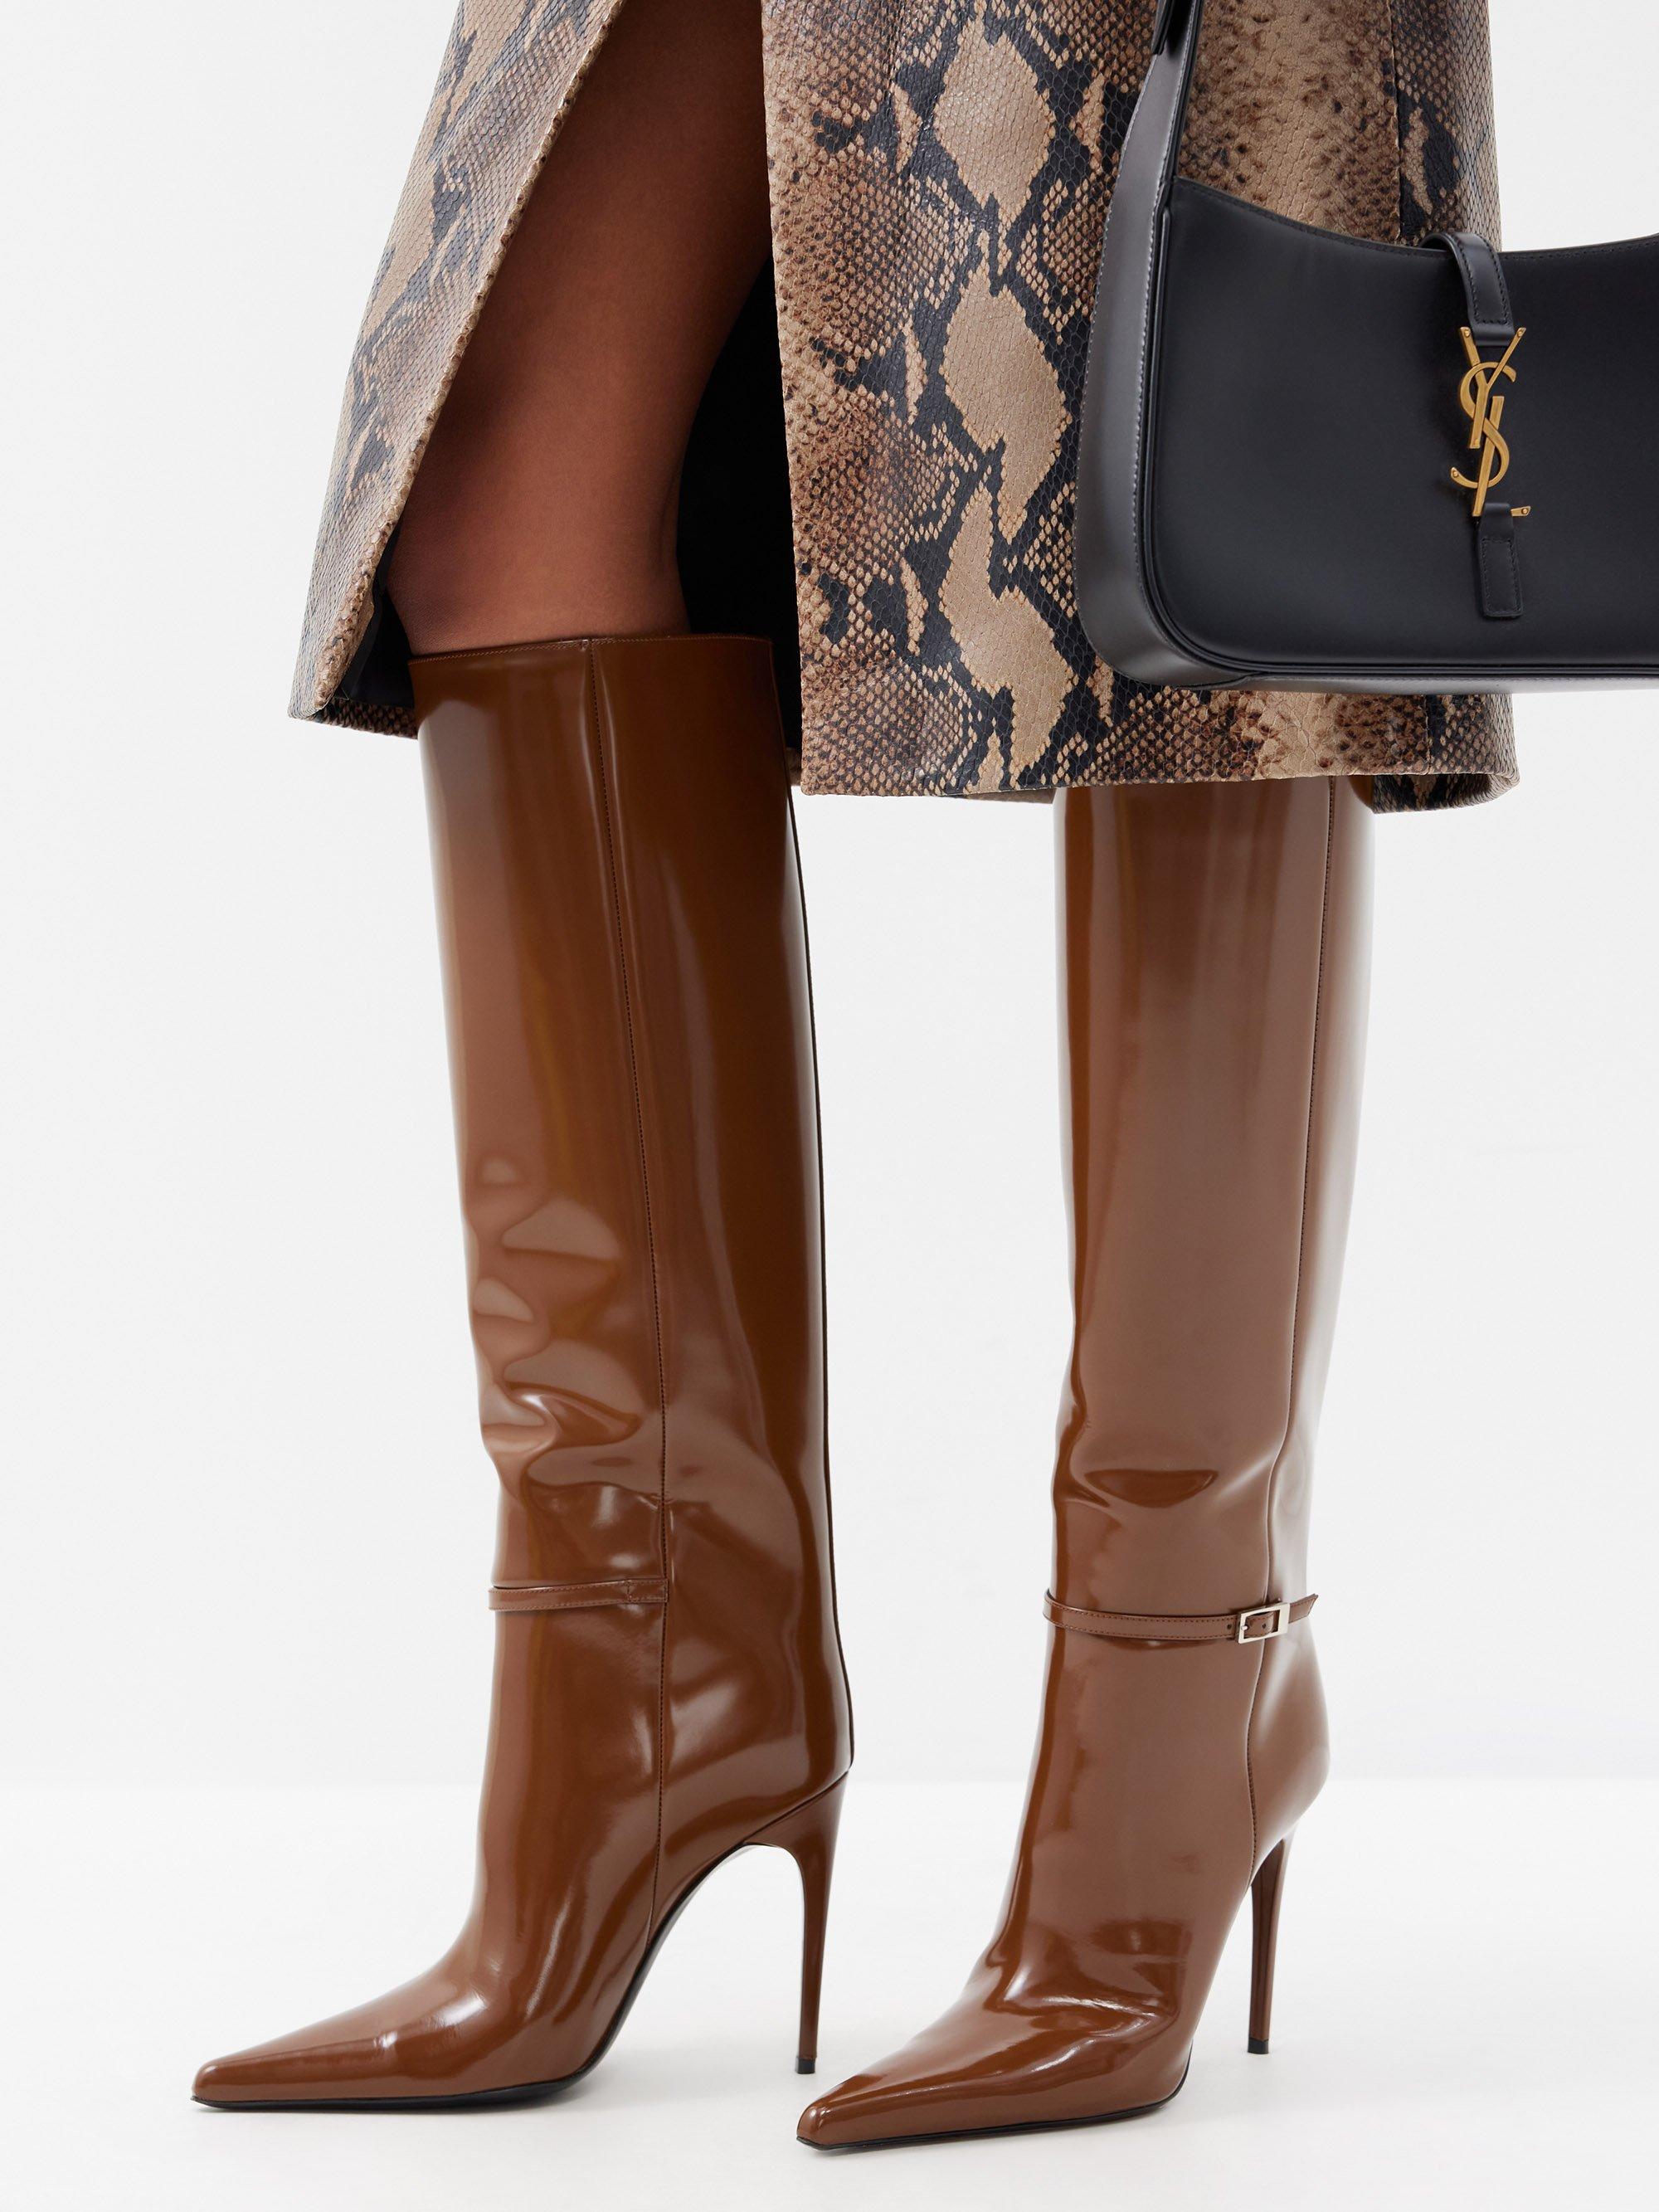 Saint Laurent Vendome 110 Patent-leather Boots in Brown | Lyst